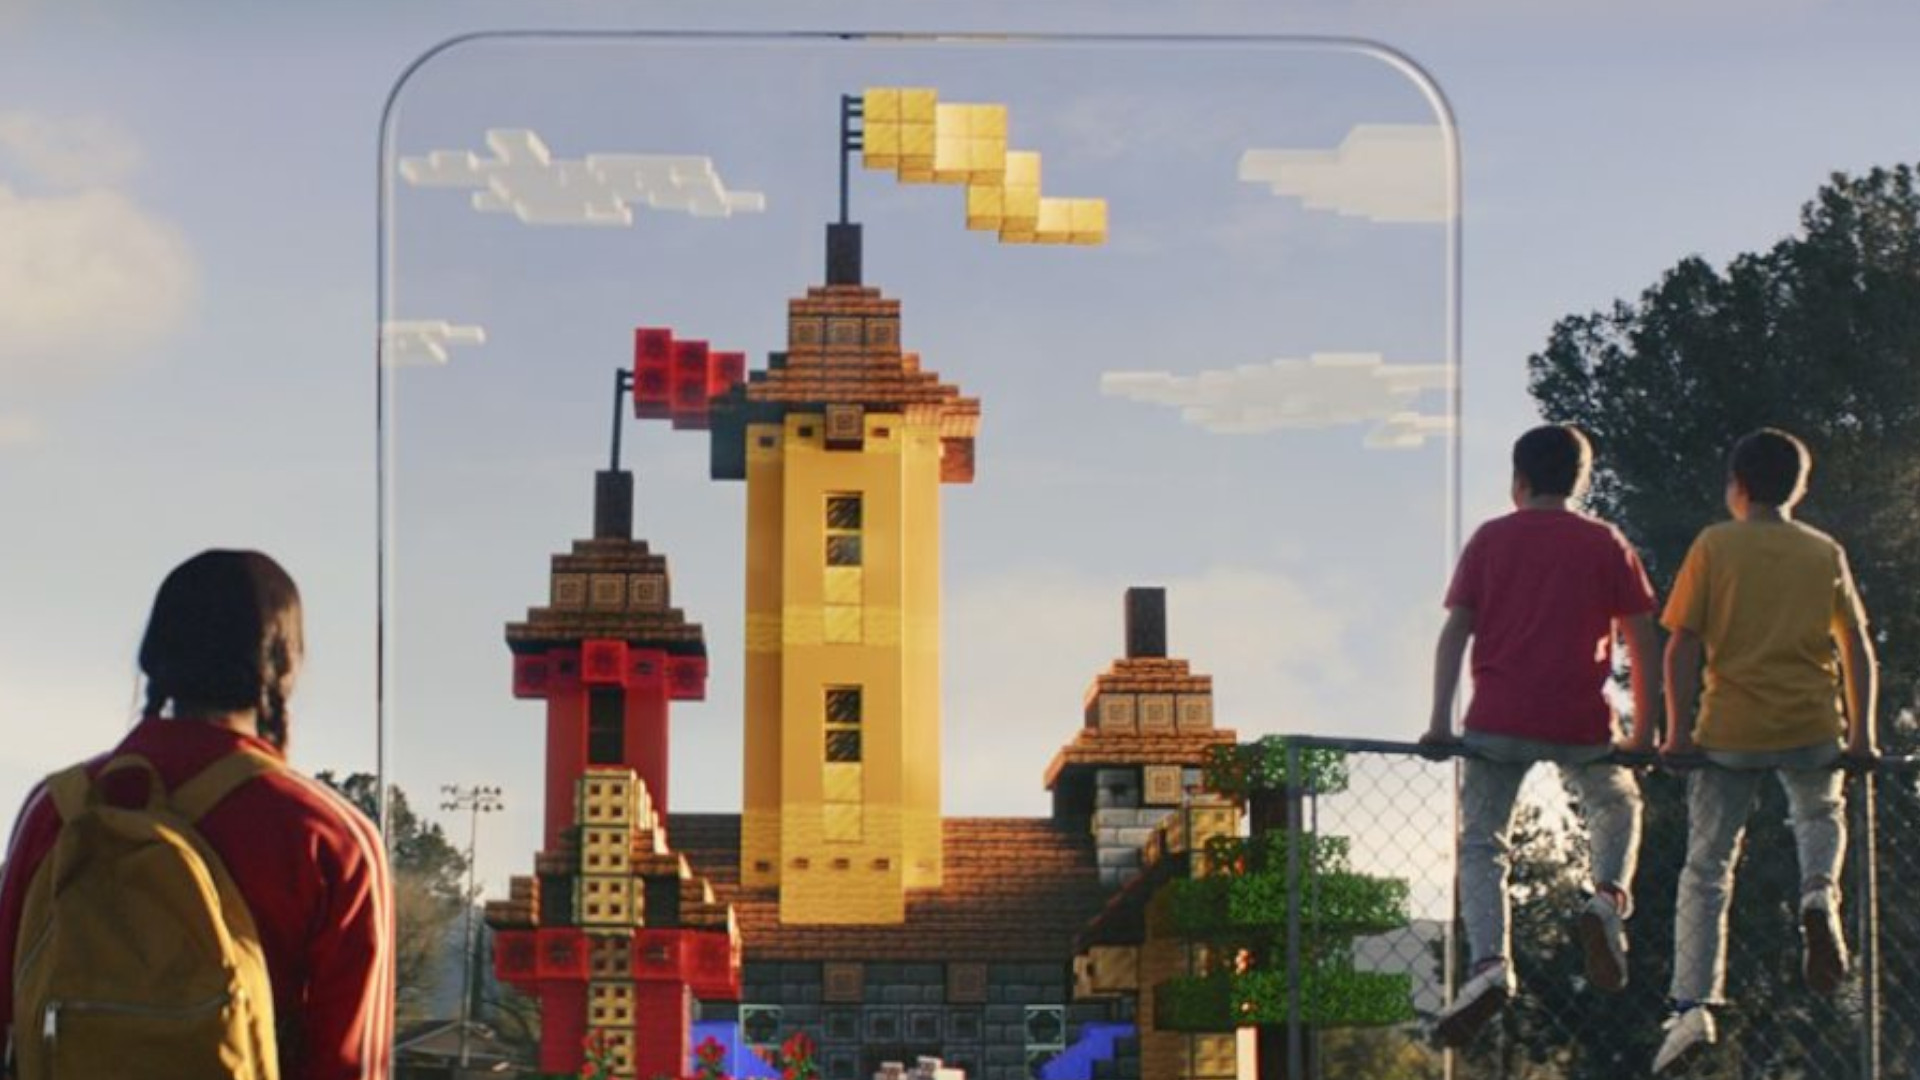 Minecraft Earth AR Mobile Game Shutting Down on June 30: All You Need to  Know